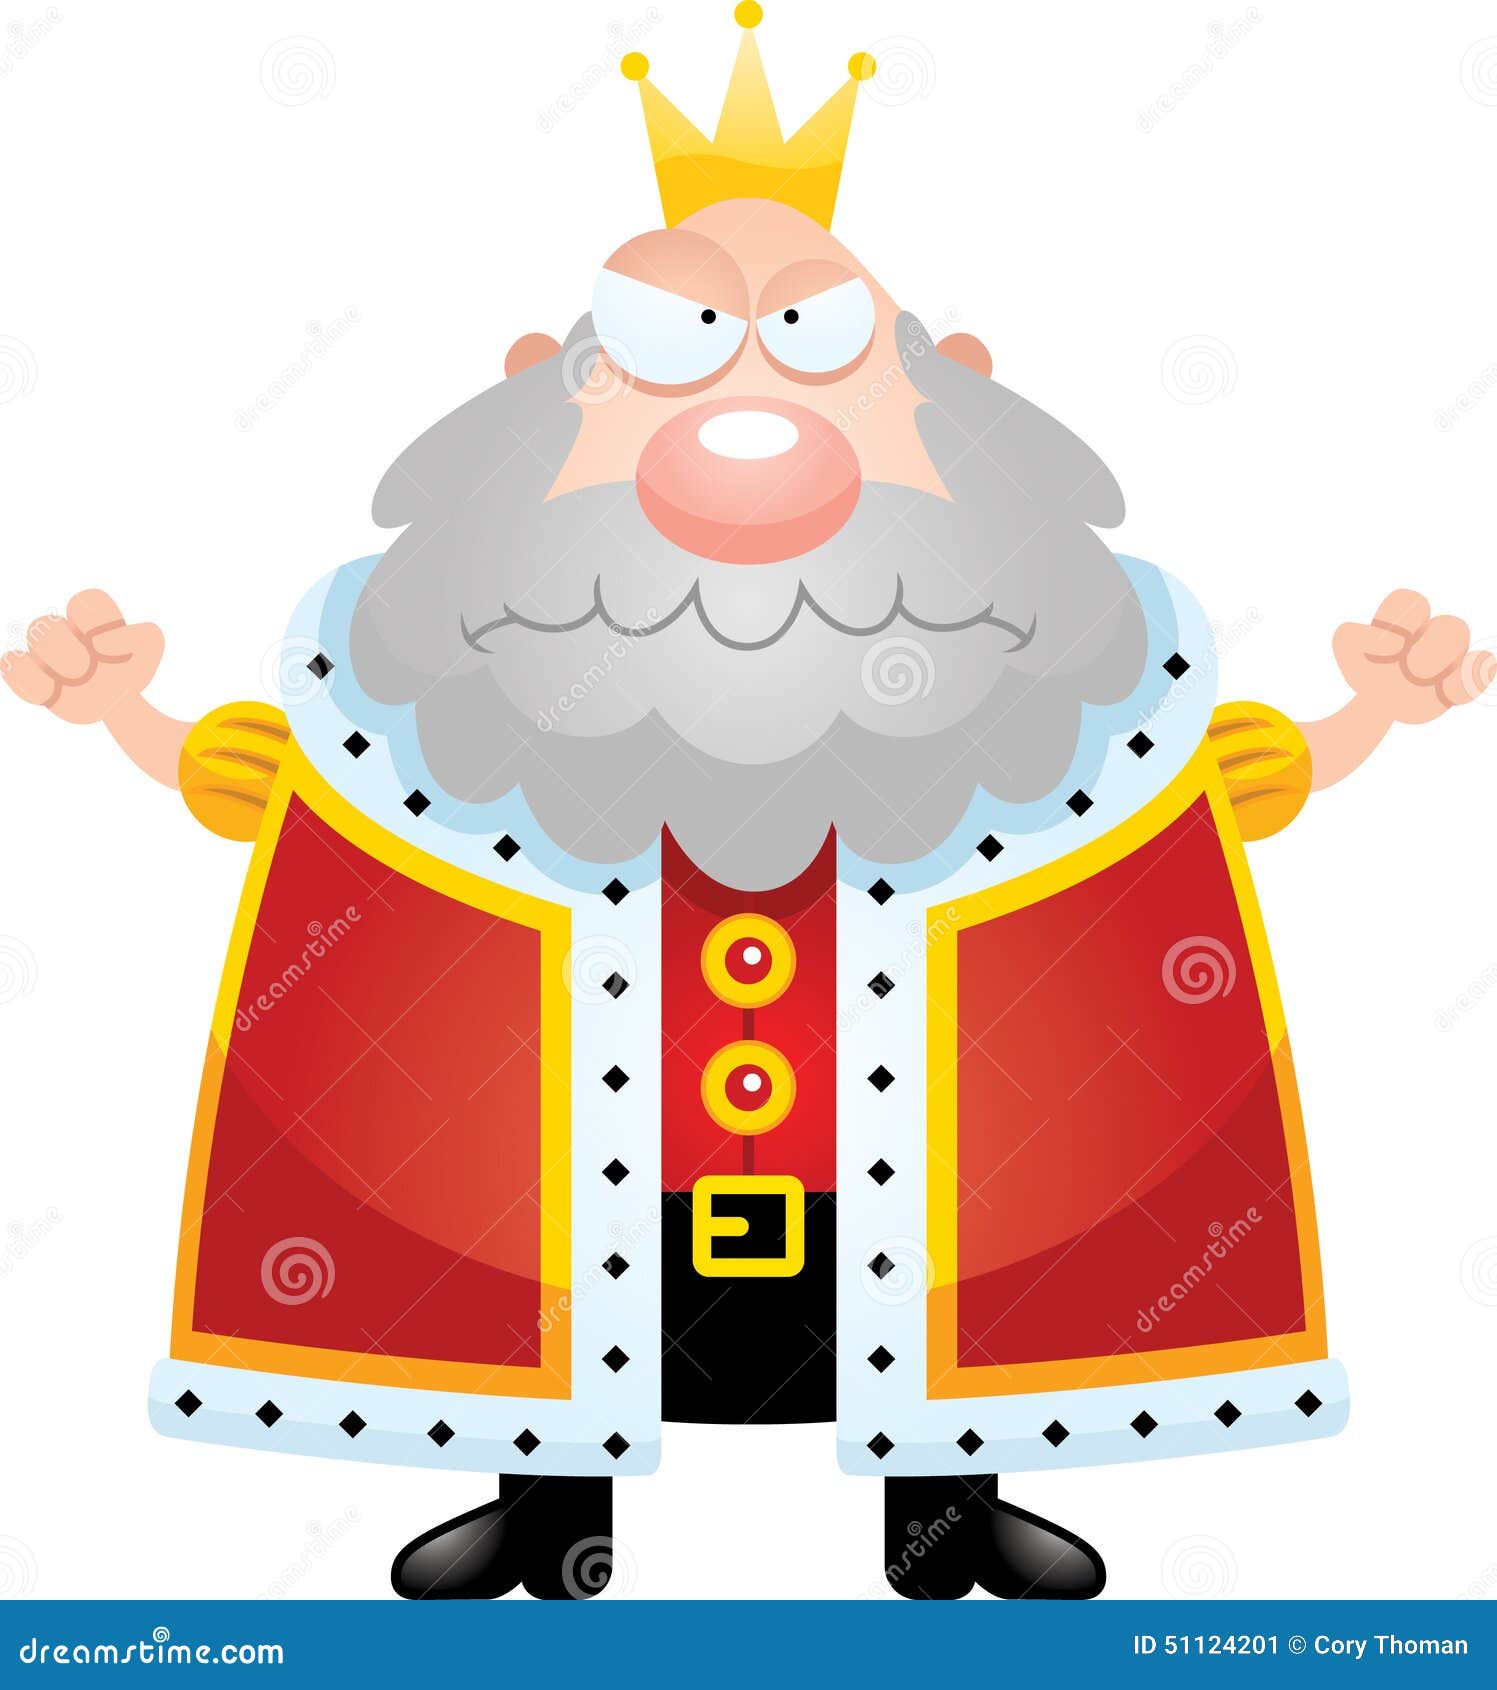 clipart mean king - photo #15